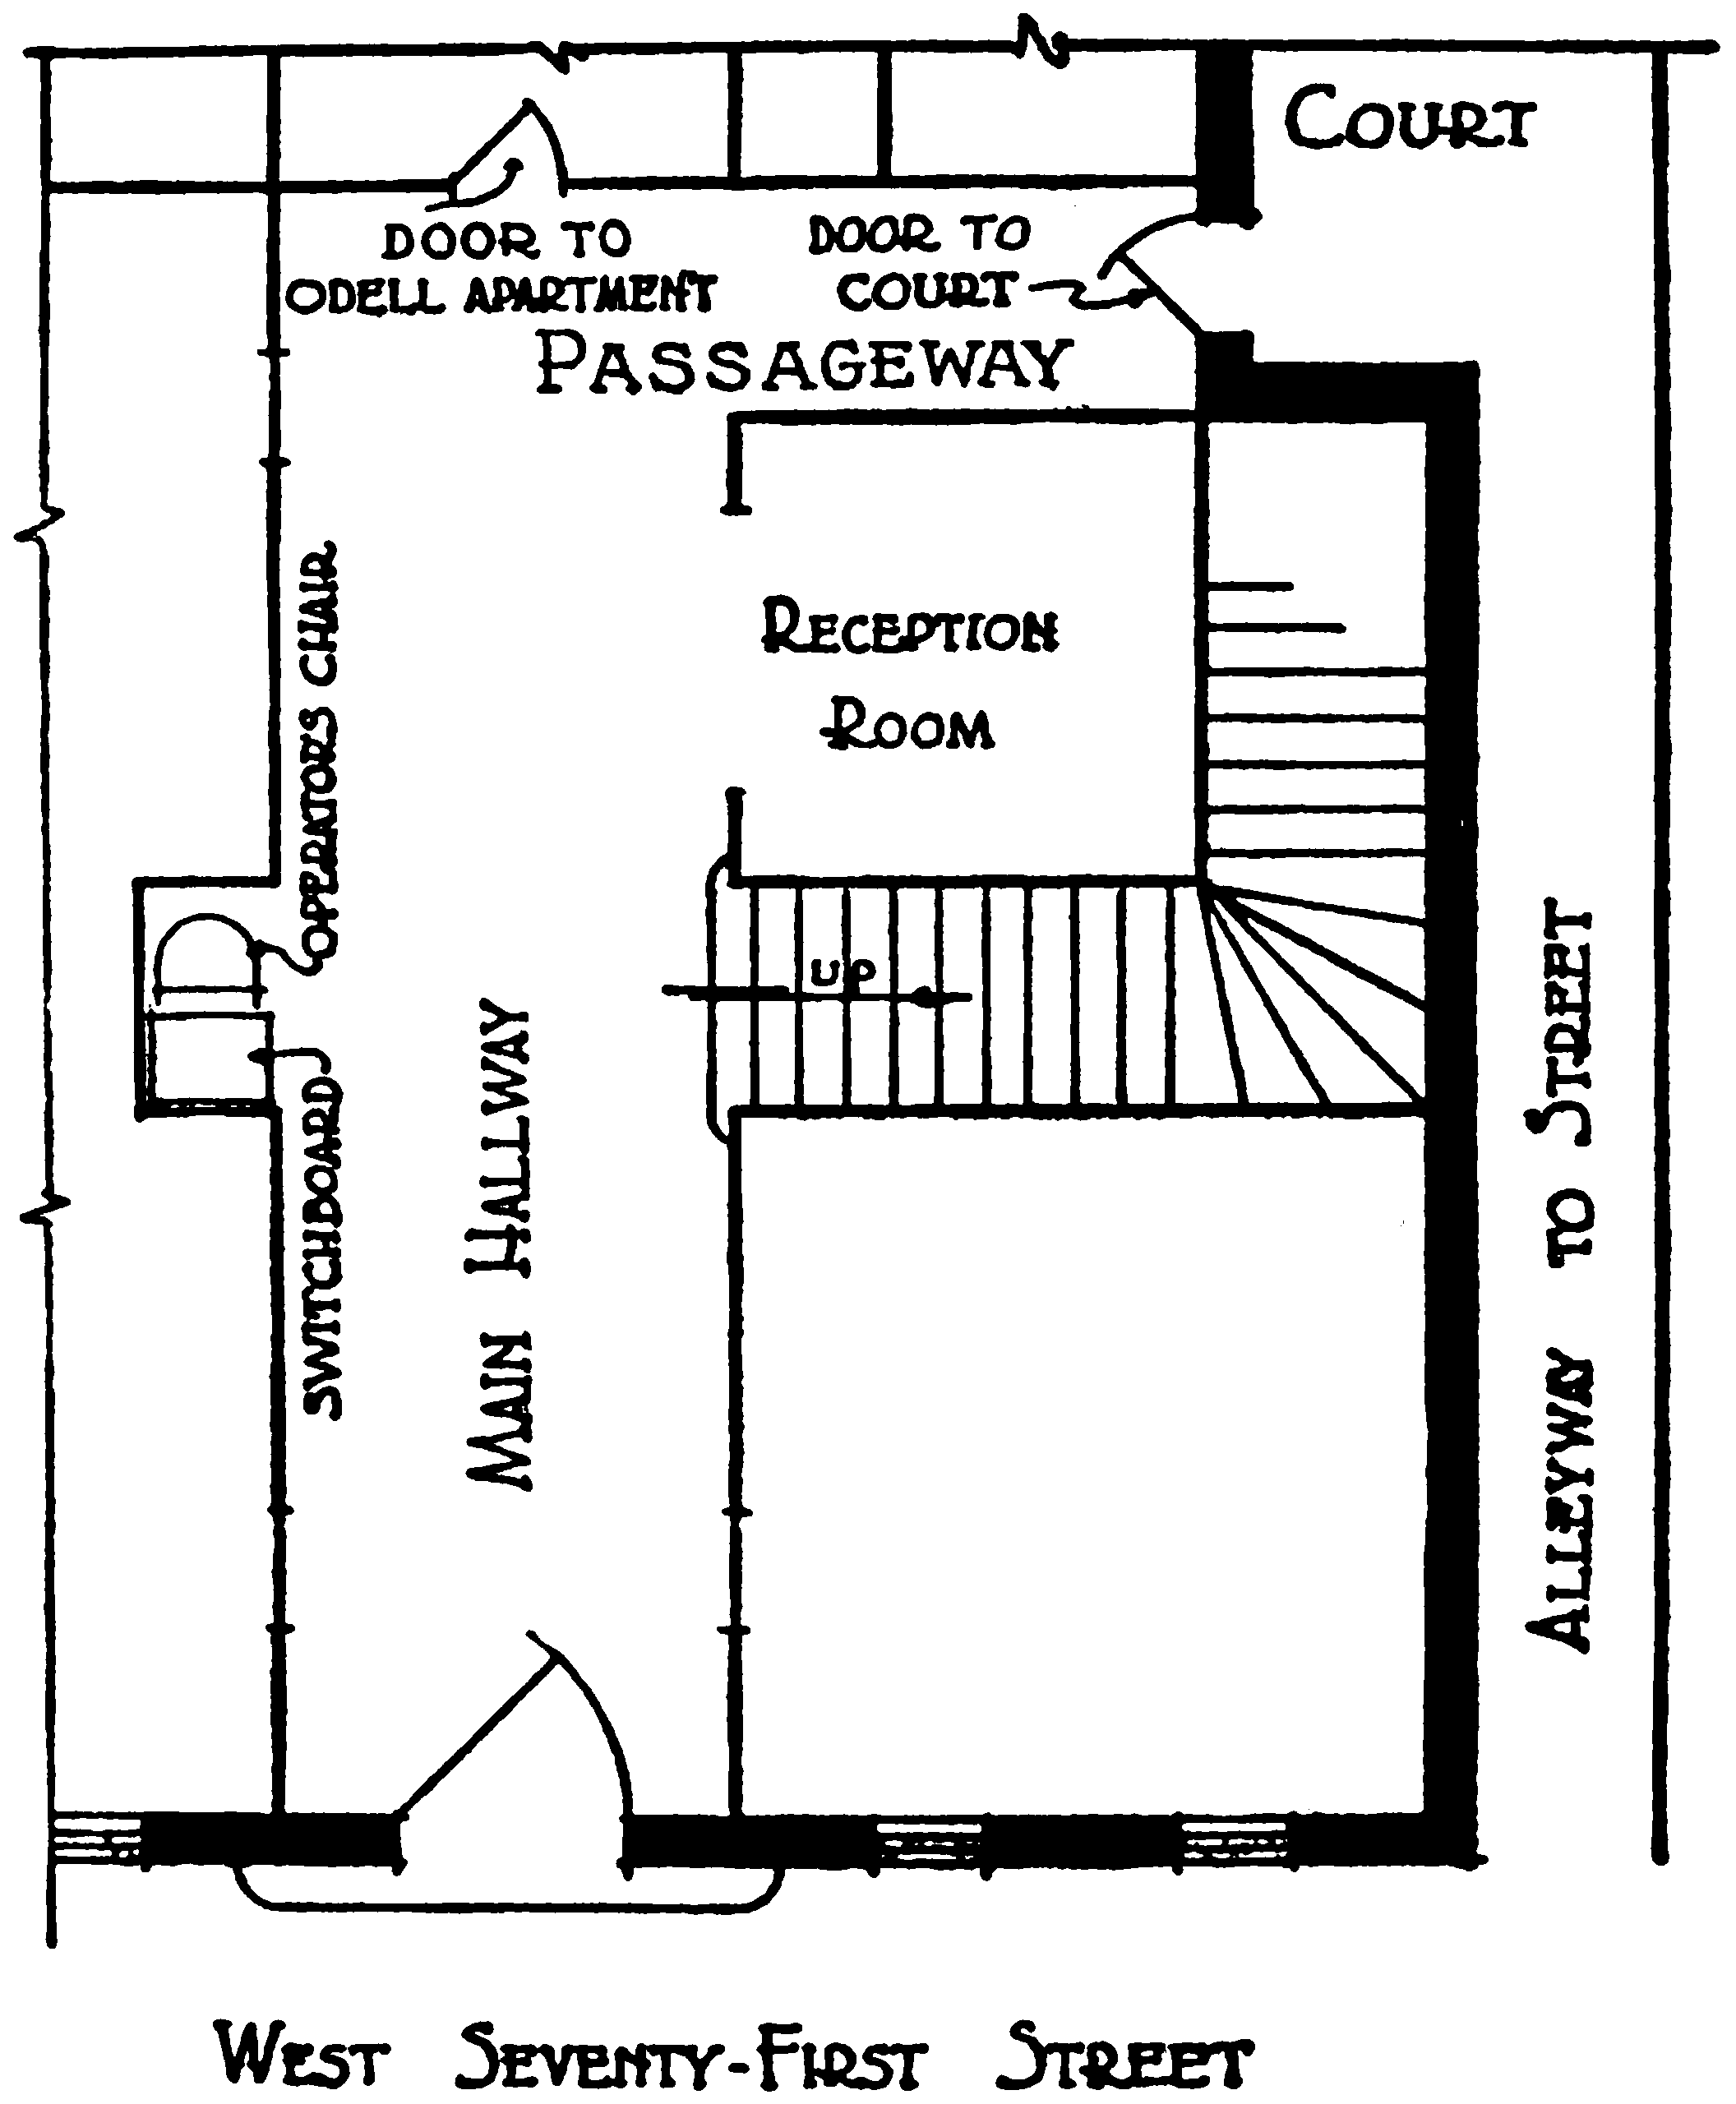 A detail of the ground-floor plan       appearing in Chapter III, focusing on the apartment building’s       main hallway, running north from the front door. Halfway down       this hallway is a niche, in which the switchboard operator sits,       and the staircase leading up is directly across from it. North       from the stairs is the reception room. The main hallway ends in       the door to the Odell apartment, and a passageway runs east from       this point, featureless except for the door at its end that       leads into the court and the alleyway.